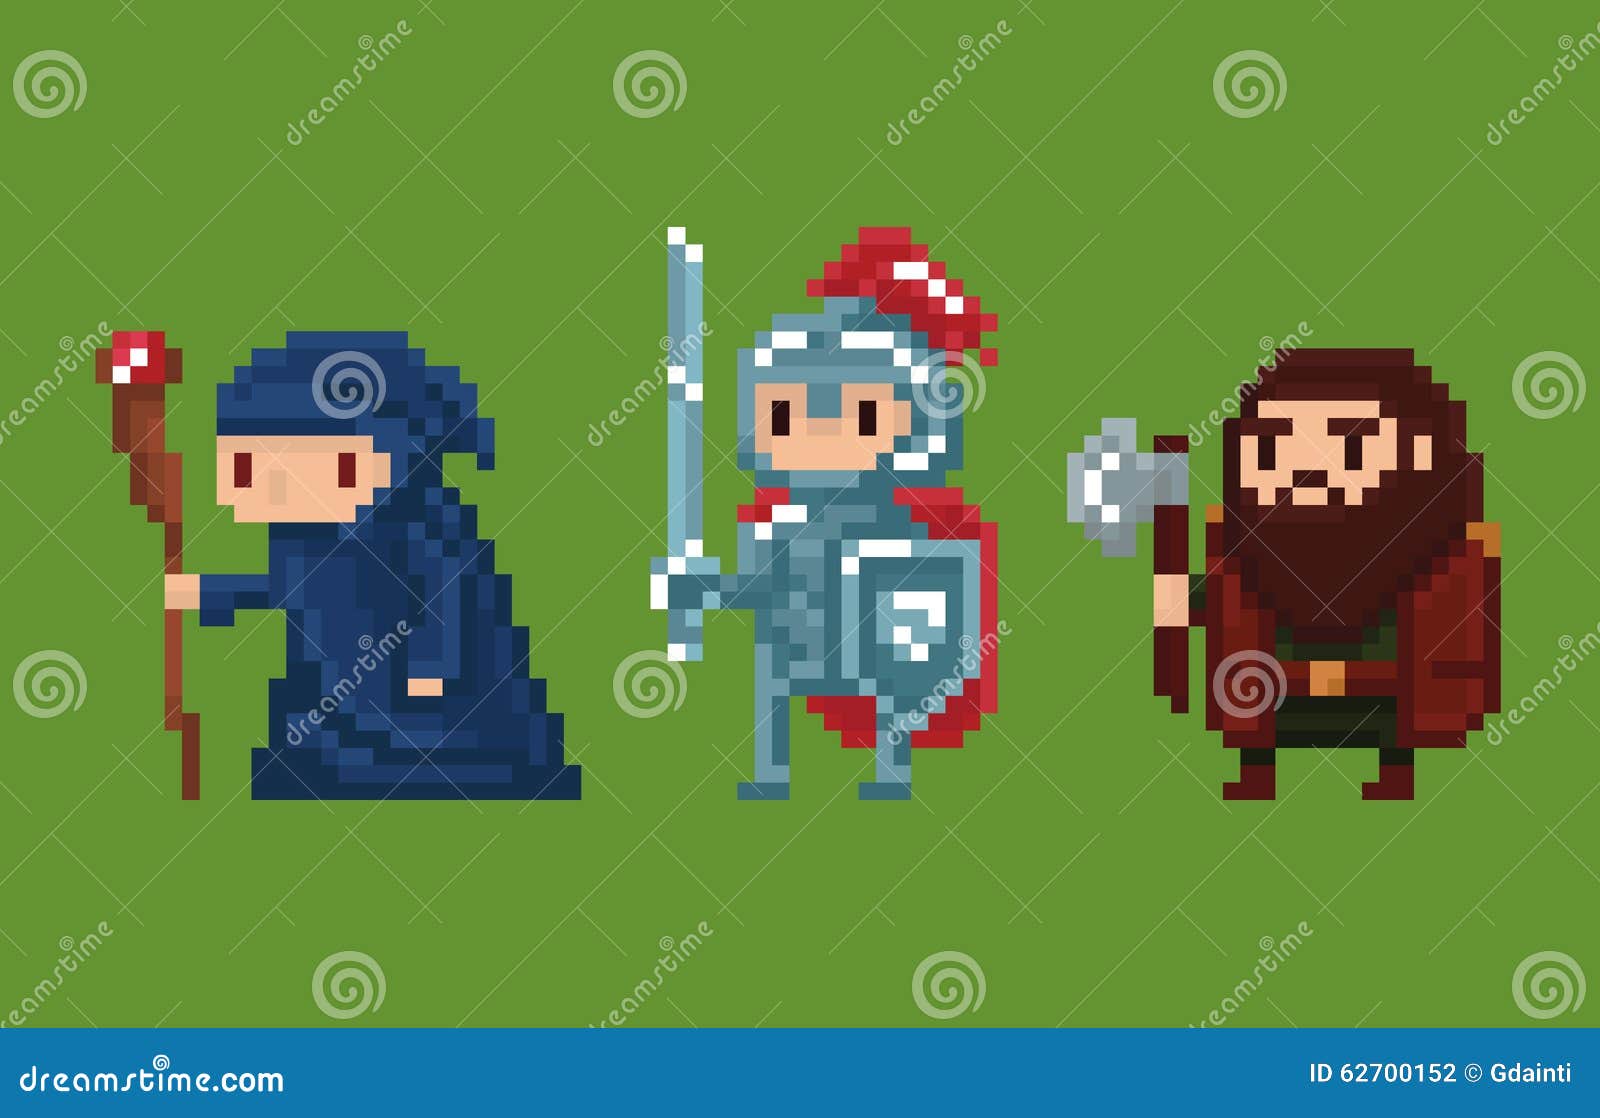 pixel art style  wizard, knight and